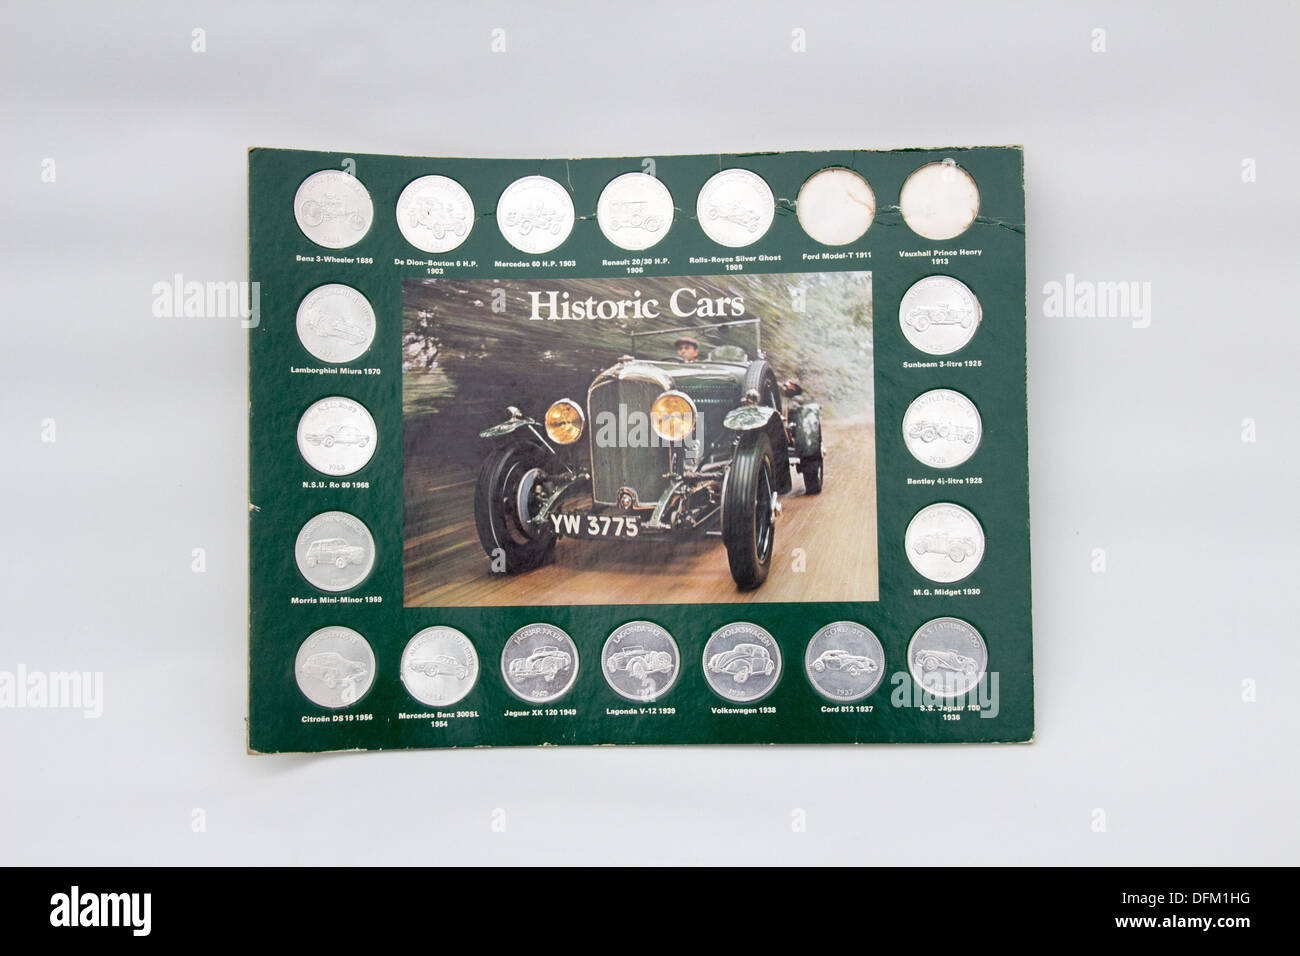 Historic cars coin collection Stock Photo - Alamy